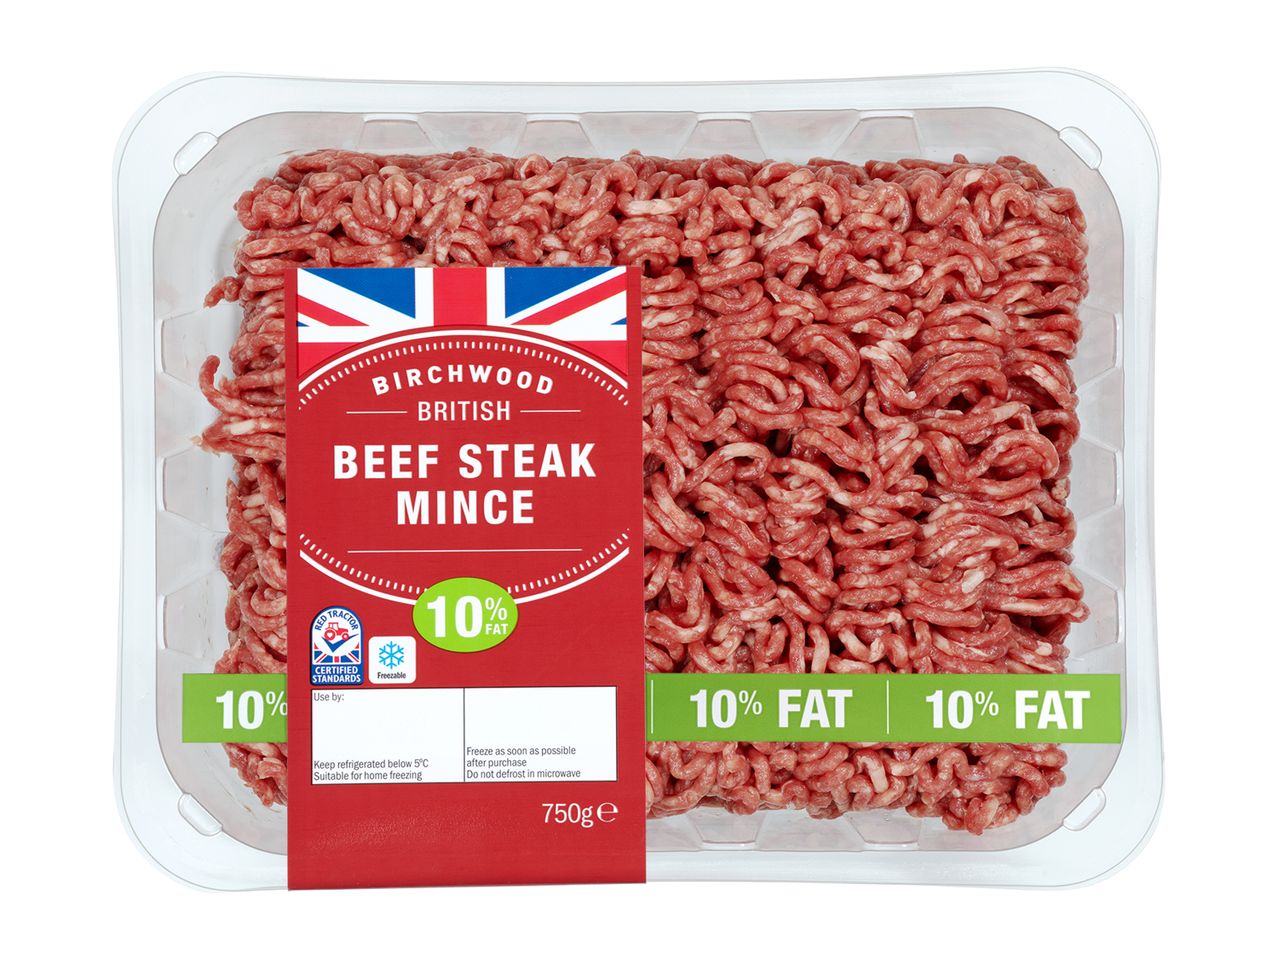 Go to full screen view: Birchwood Welsh 10% Beef Mince - Image 1